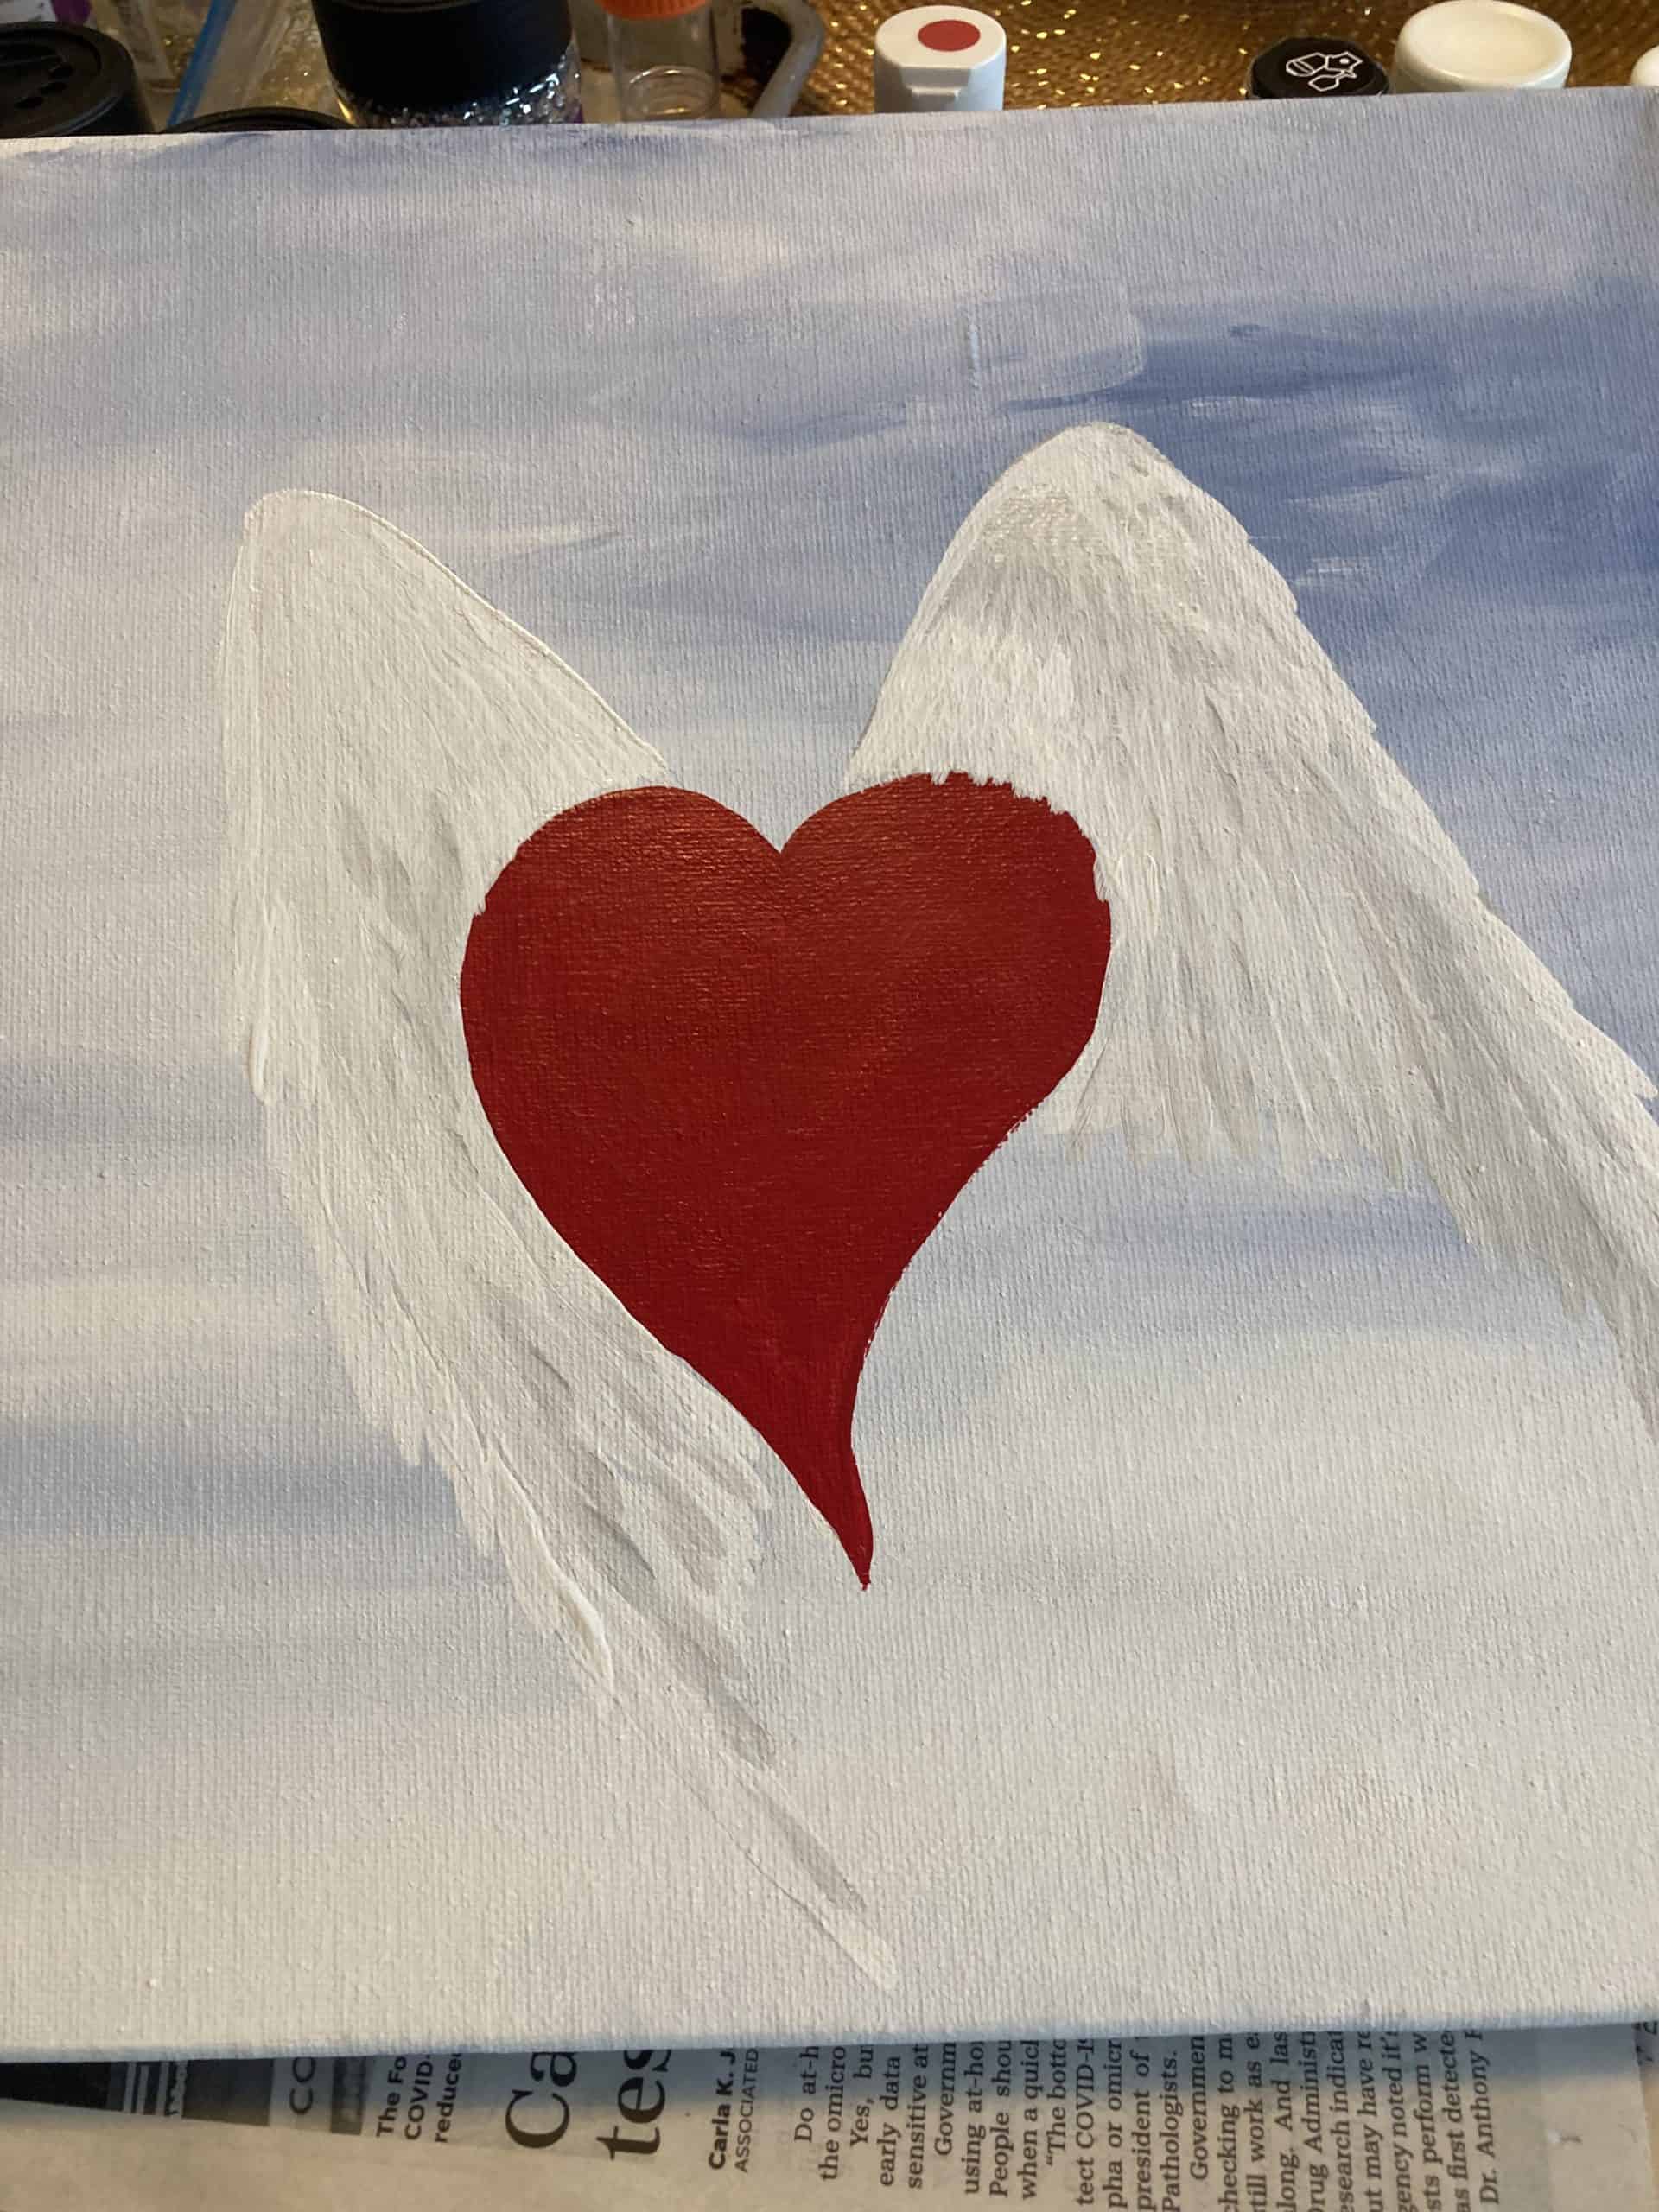 Painting of wings with a heart